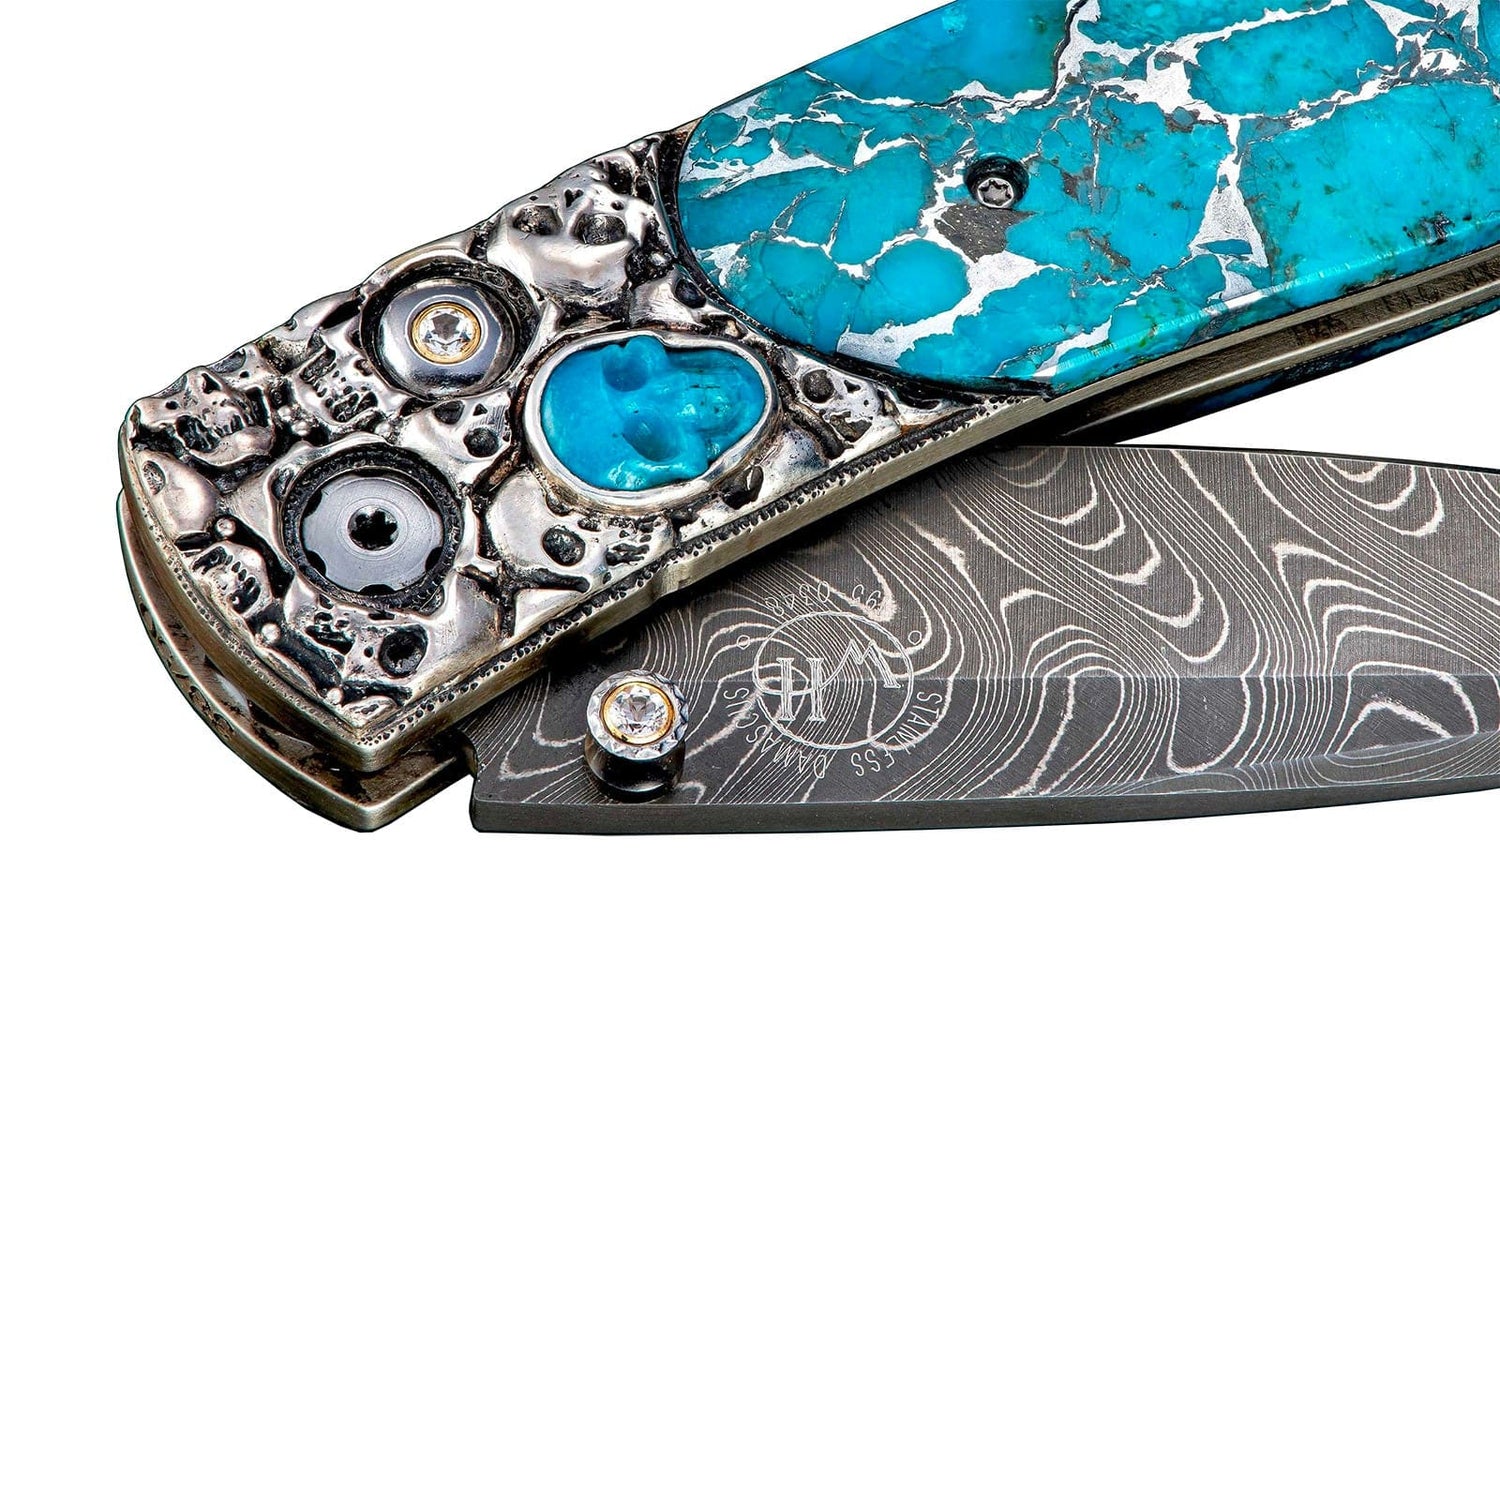 Monarch 'Tombstone' Limited Edition Pocket Knife - William Henry- Diamond Cellar